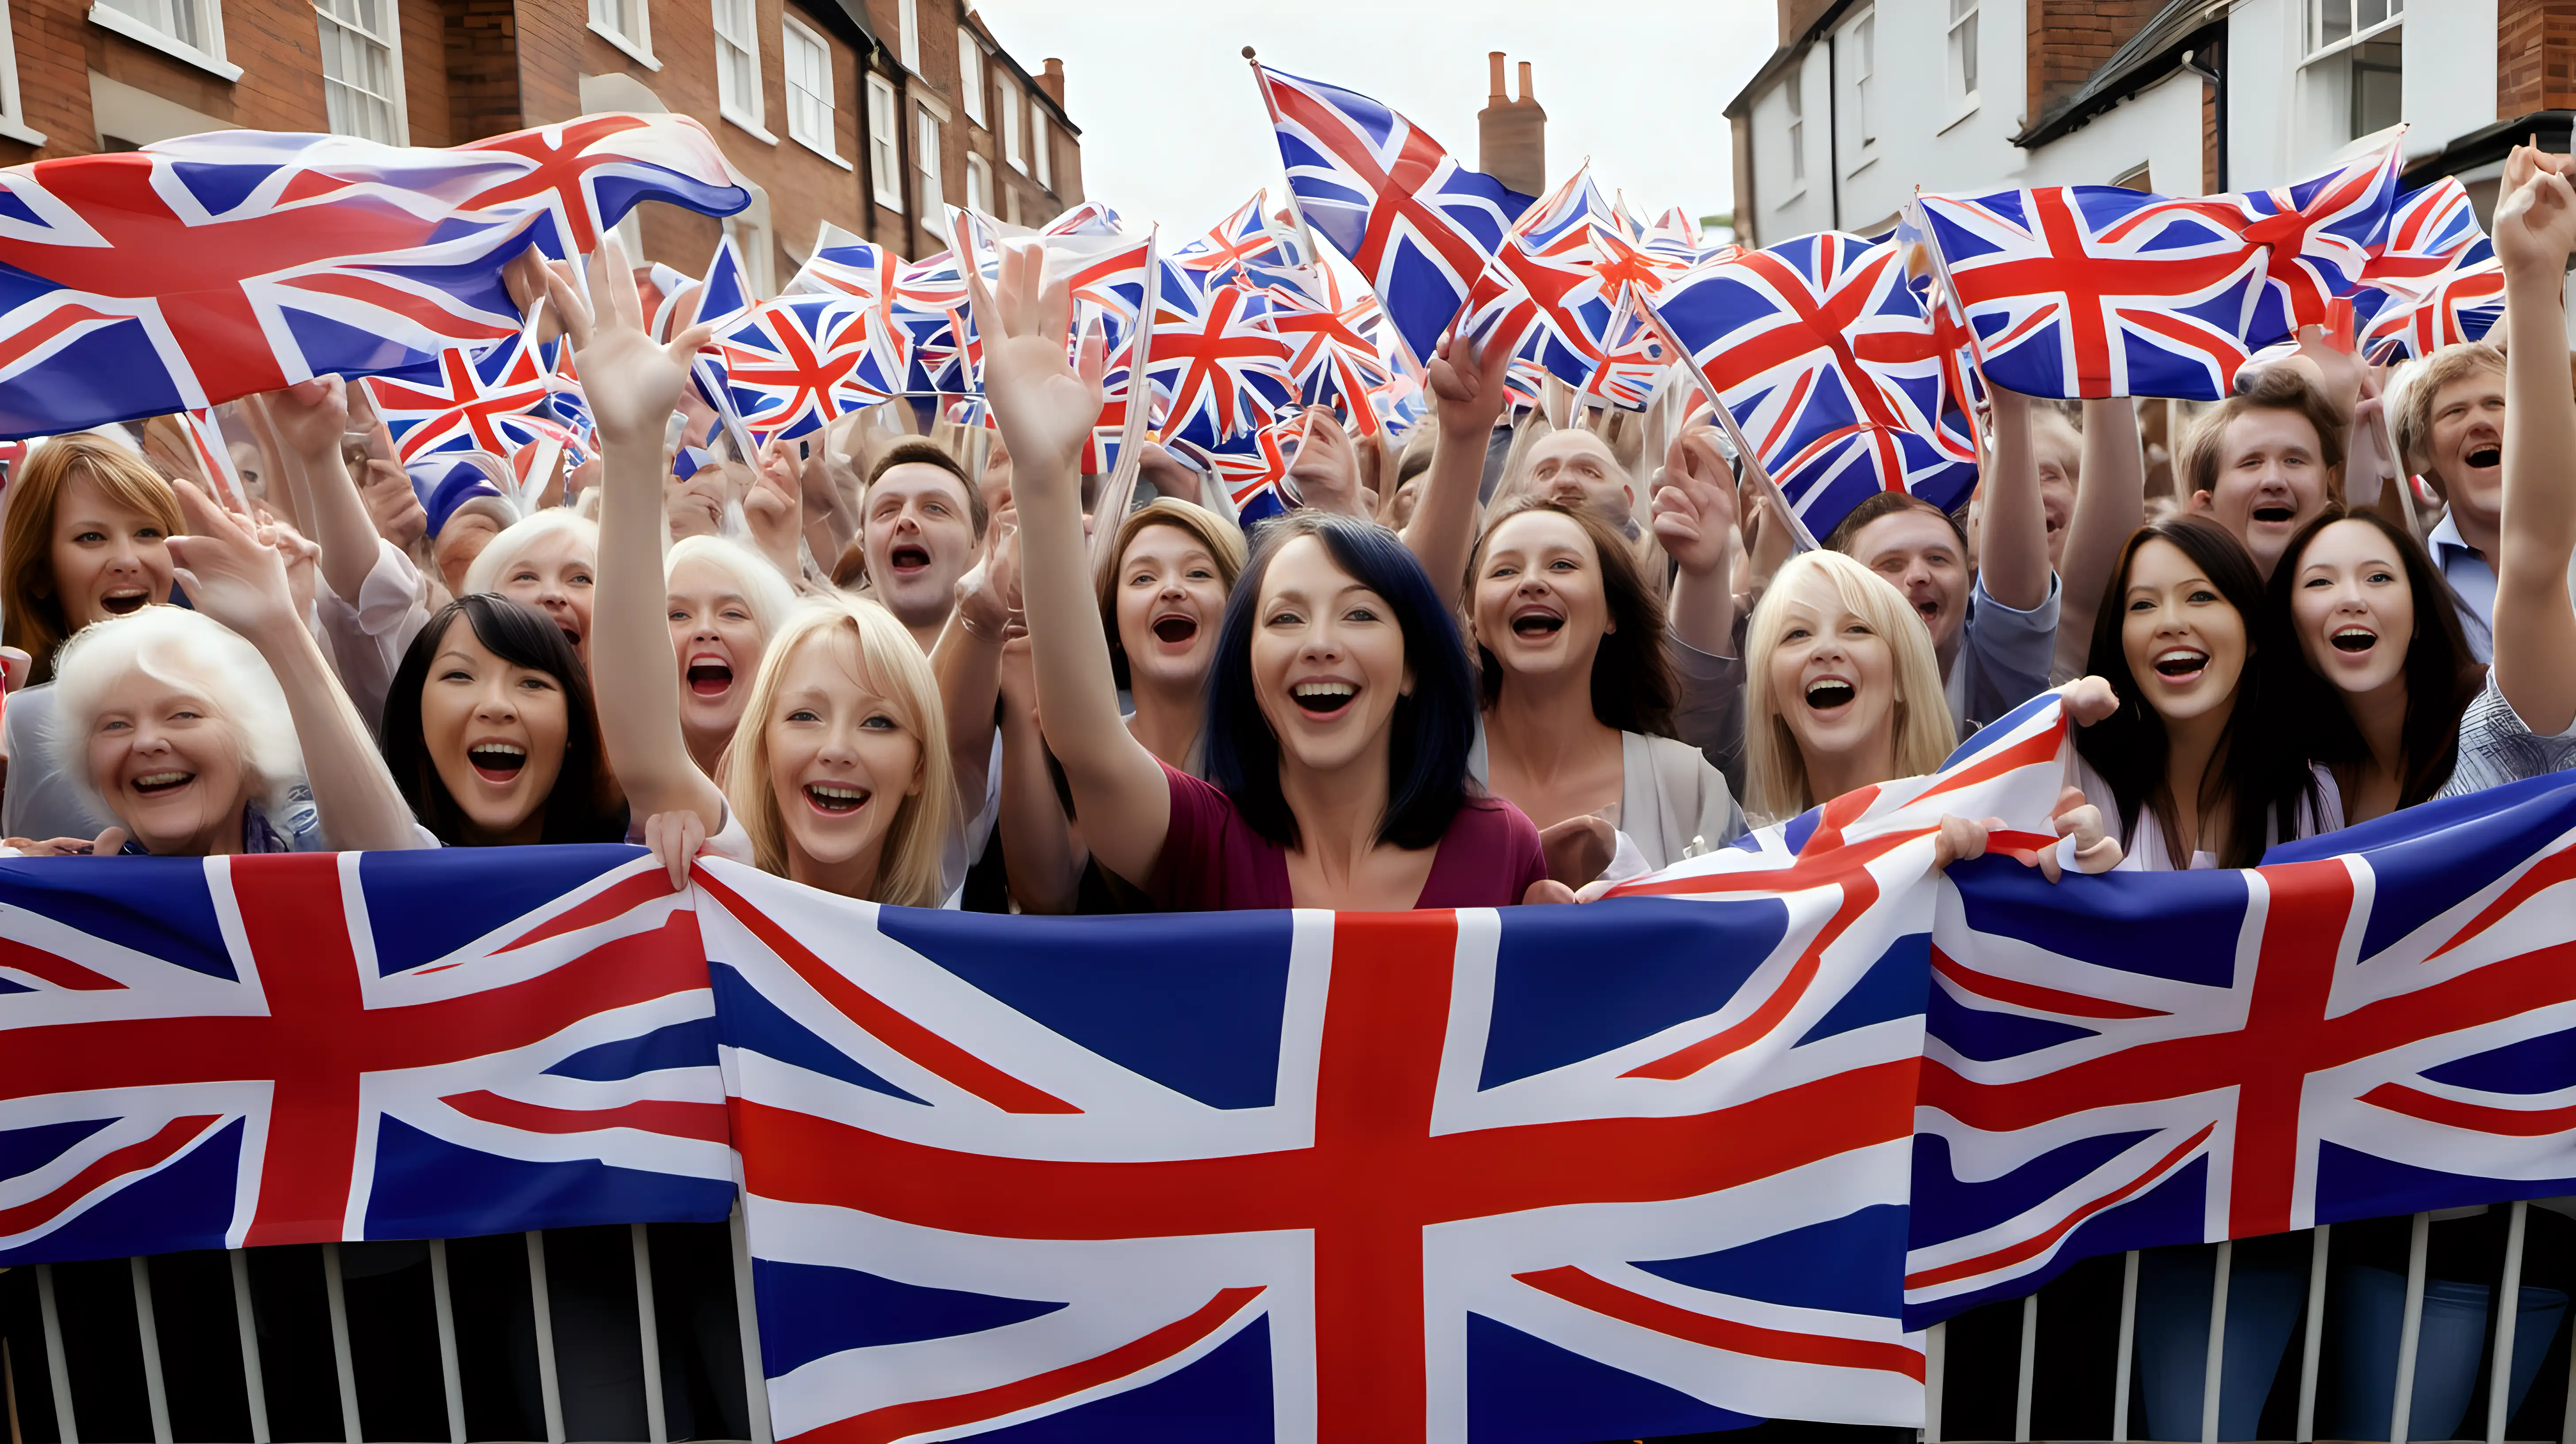 Patriotic Crowd Waving Union Jack Flags with Smiles